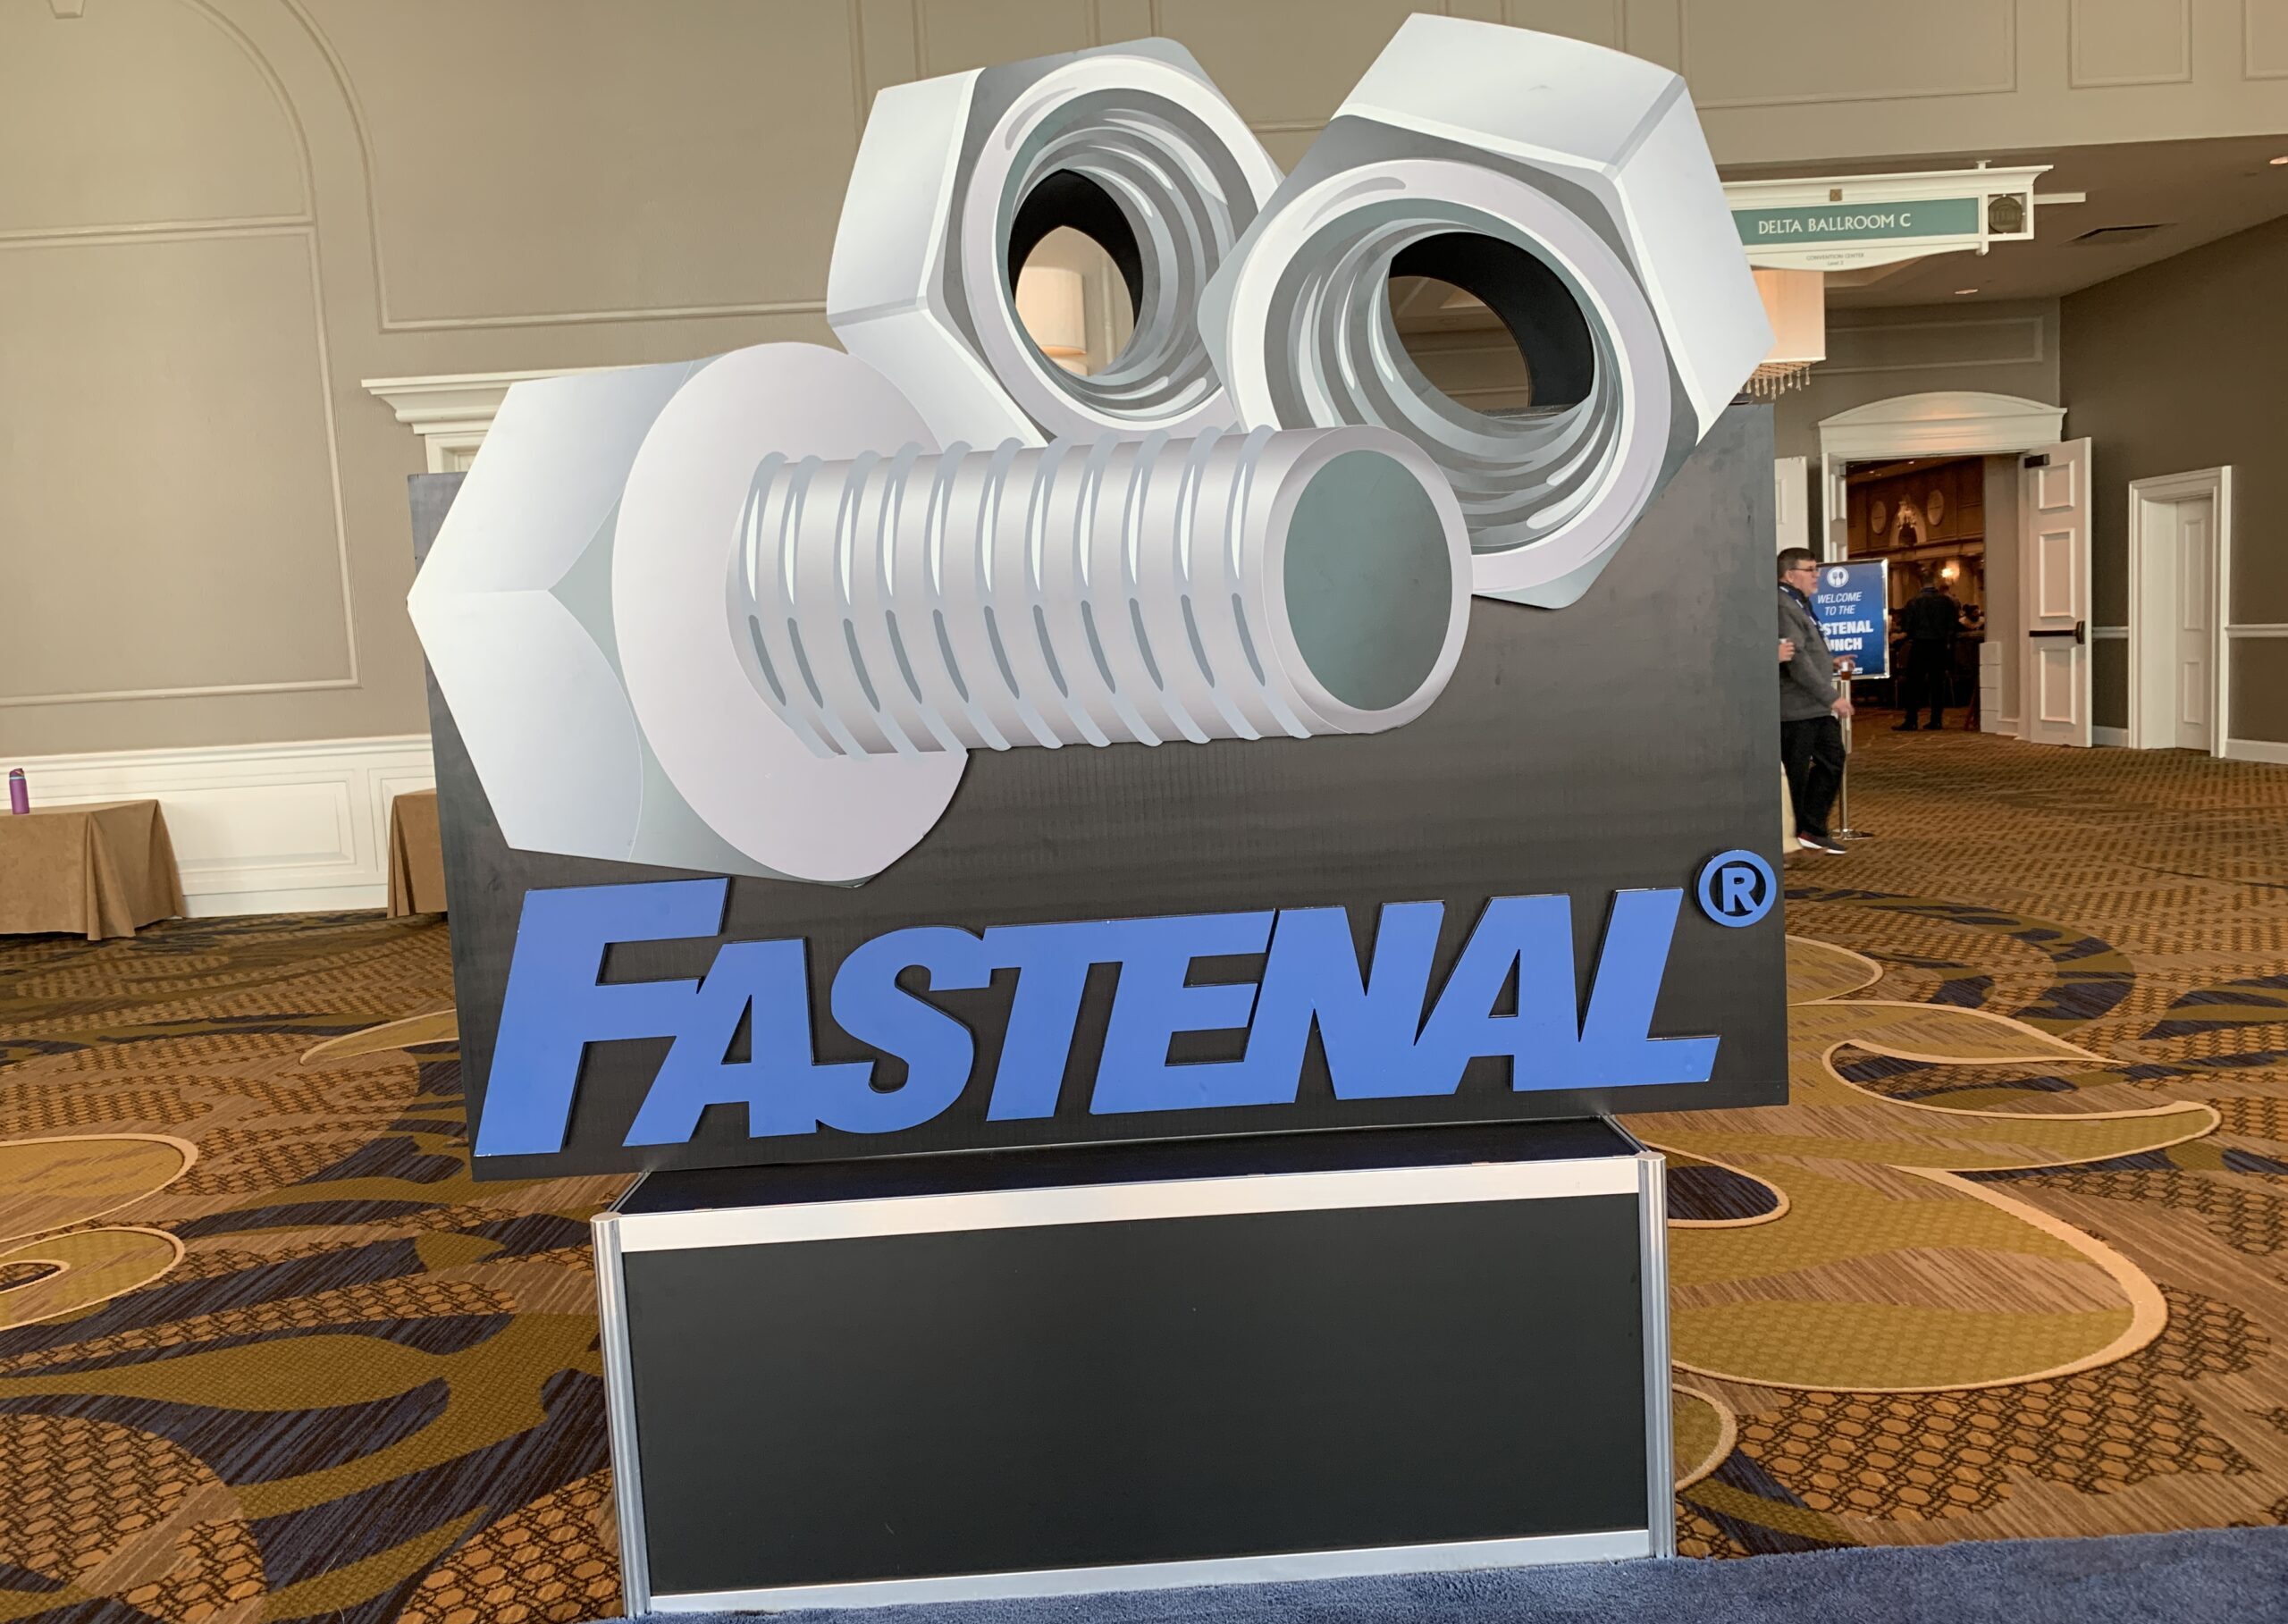 Fastenal Expo 2022 marked the company's first in-person company showcase in three years.